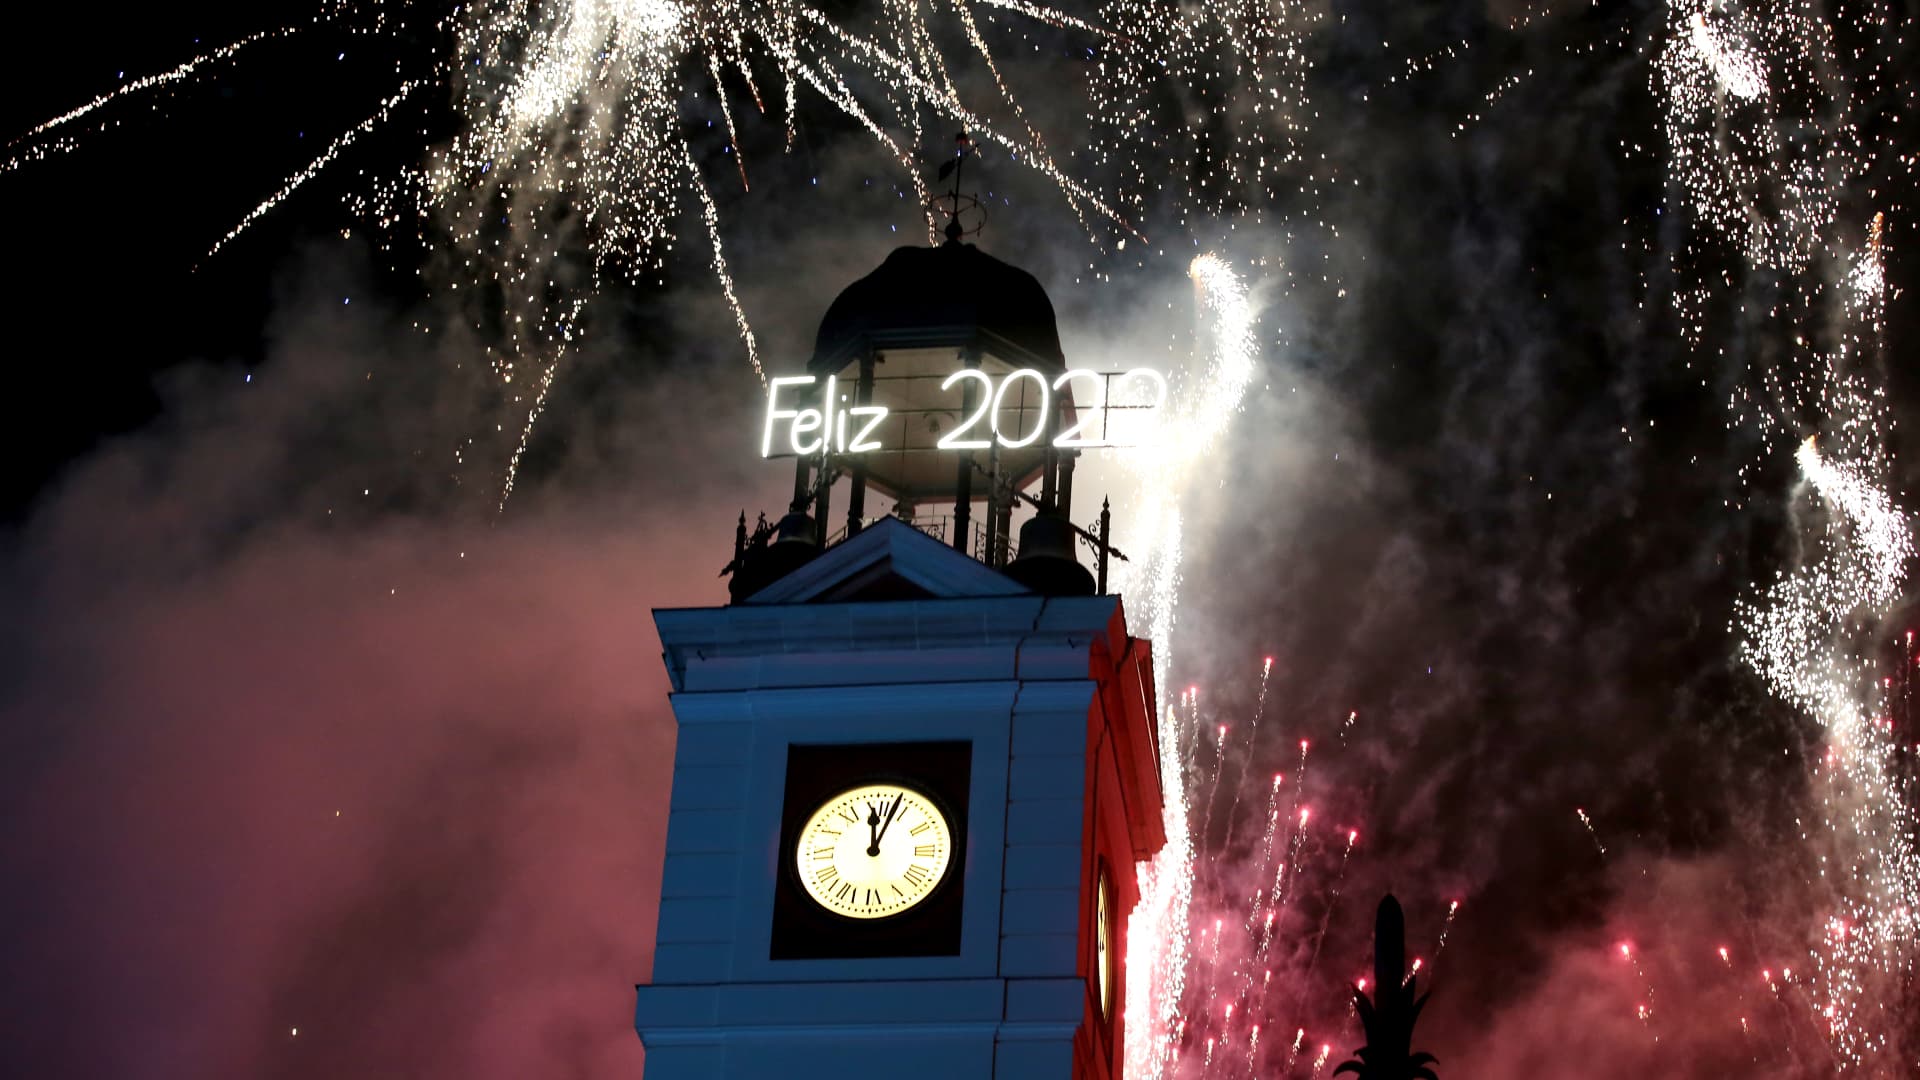 Fireworks light up the sky as part of New Year celebrations at the Puerta del Sol in Madrid, Spain on Dec. 31, 2021.